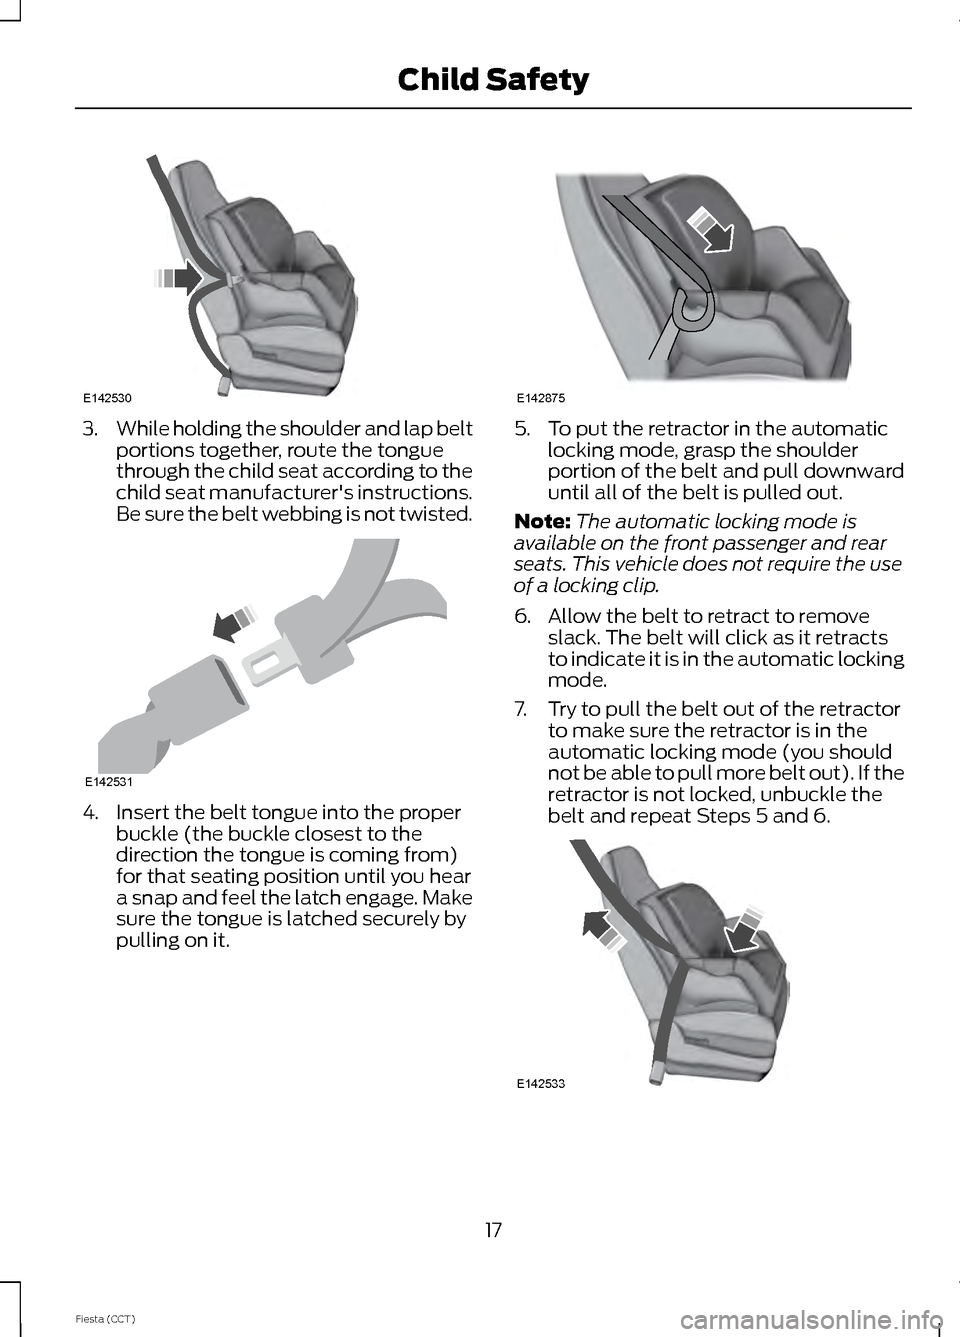 FORD FIESTA 2014 6.G Owners Manual 3.
While holding the shoulder and lap belt
portions together, route the tongue
through the child seat according to the
child seat manufacturers instructions.
Be sure the belt webbing is not twisted. 